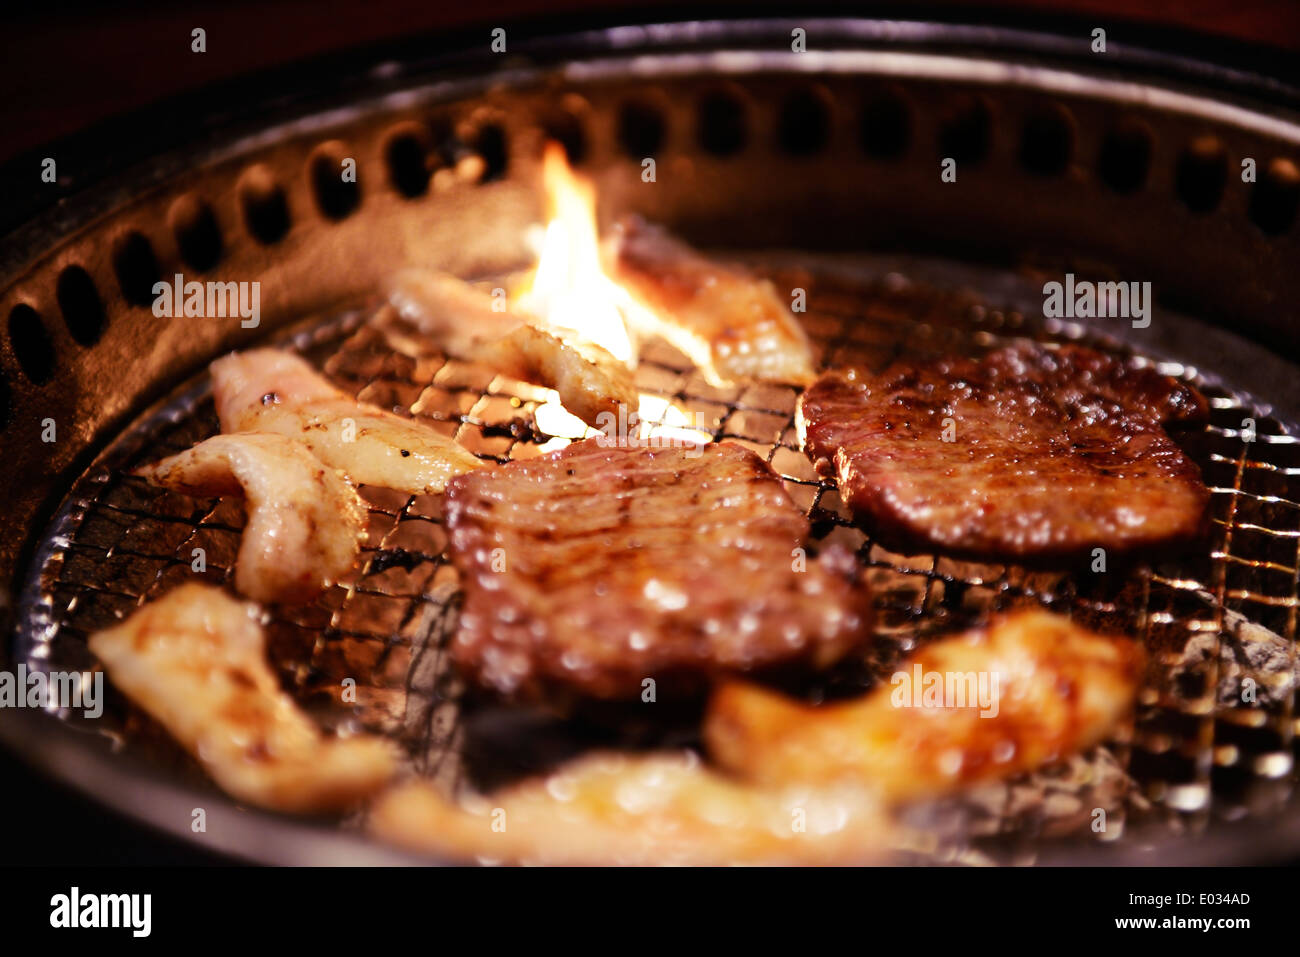 Meat being cooked at a Japanese grill restaurant. Yakiniku, Japanese barbecue. Stock Photo